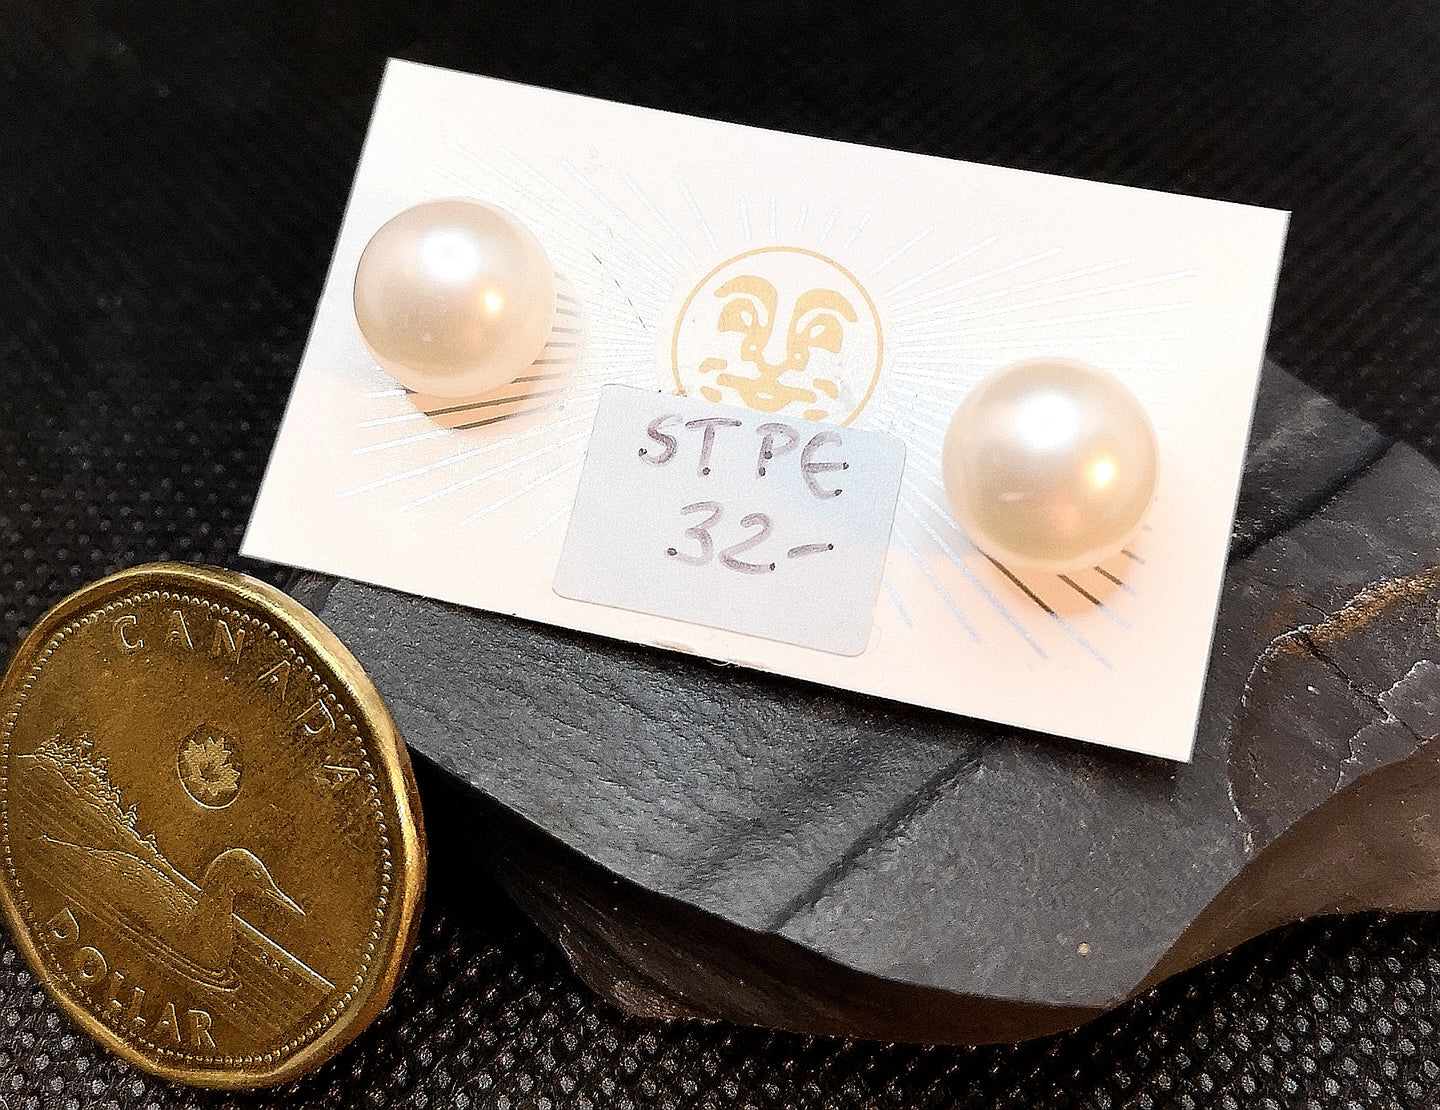 Large 10mm genuine pearl stud earrings with sterling silver backing